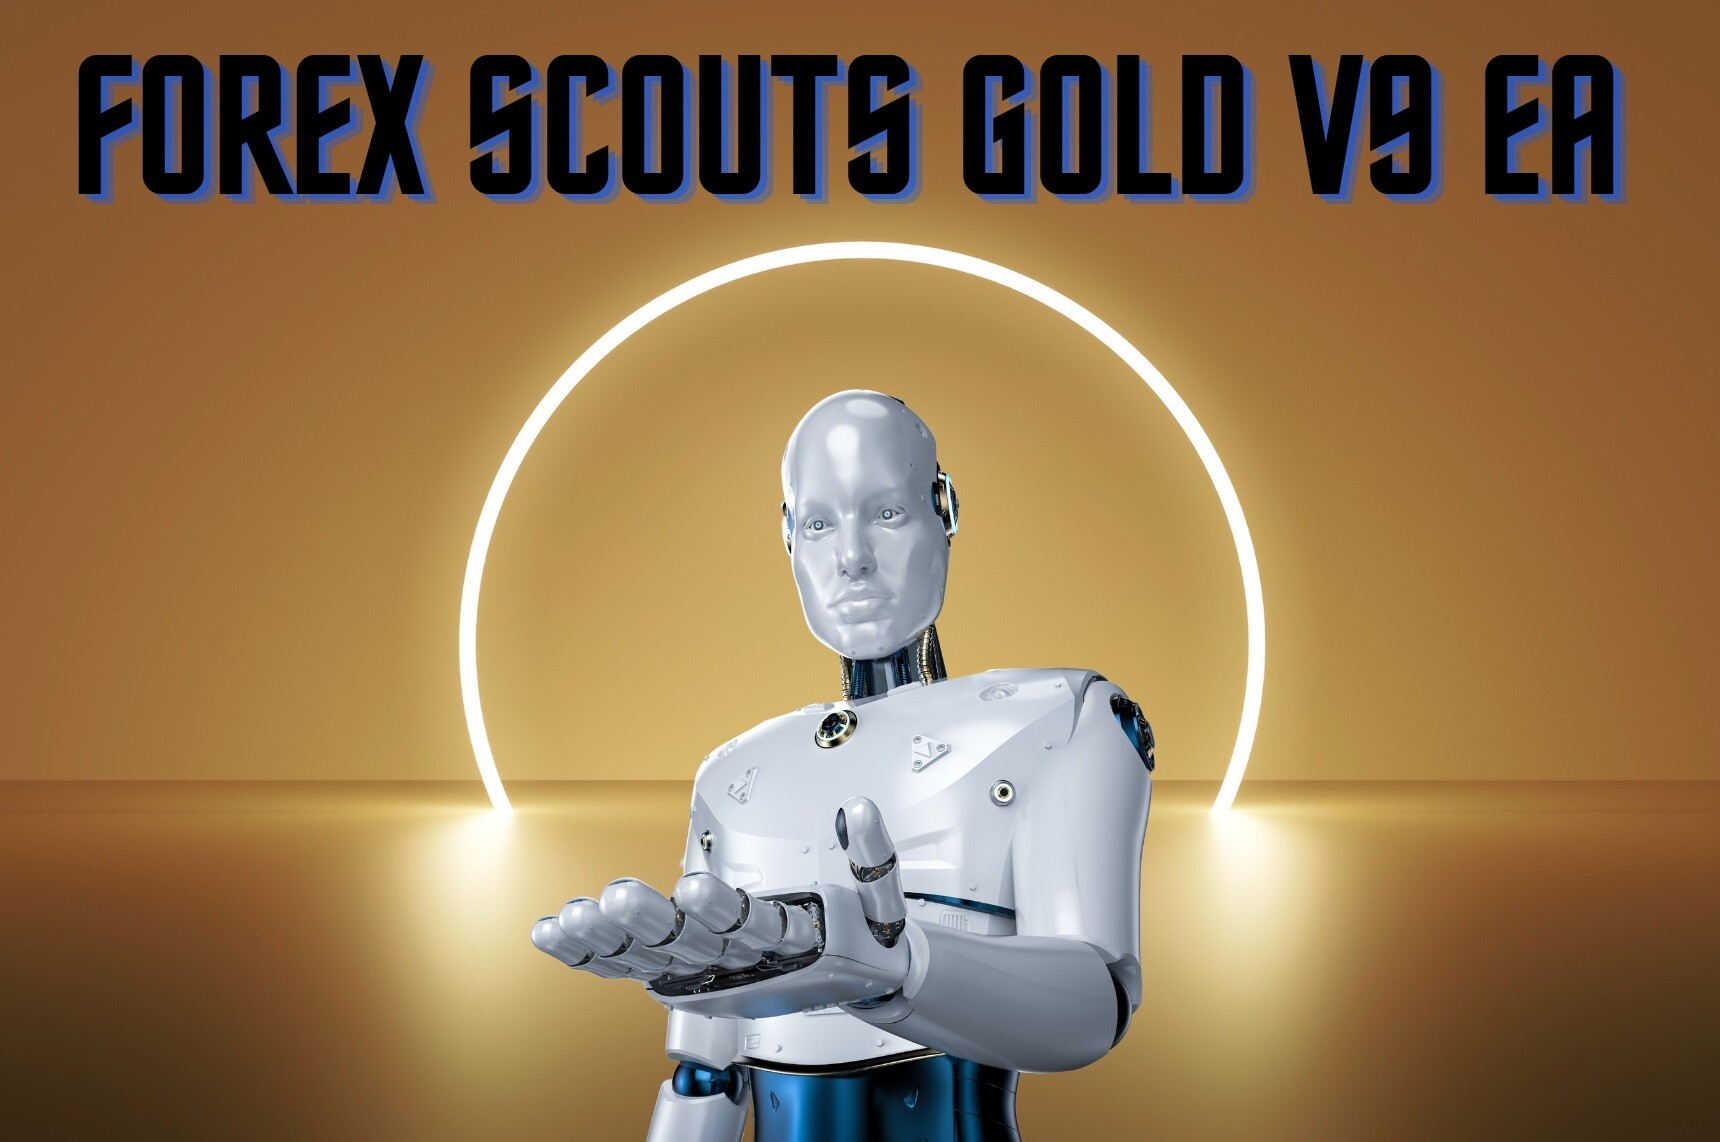 Forex Scouts Gold V9 Robot